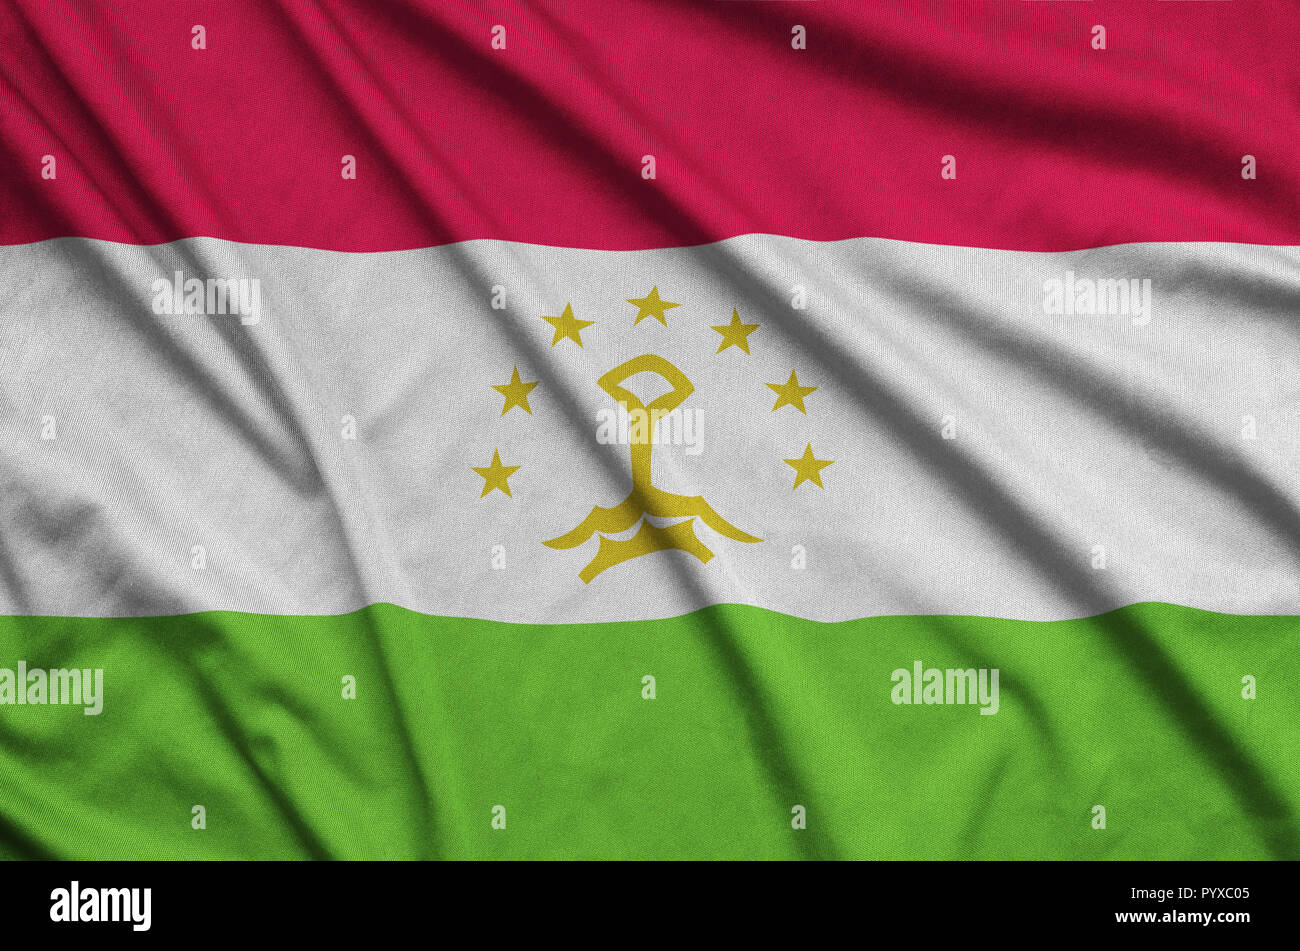 Tajikistan flag  is depicted on a sports cloth fabric with many folds. Sport team waving banner Stock Photo